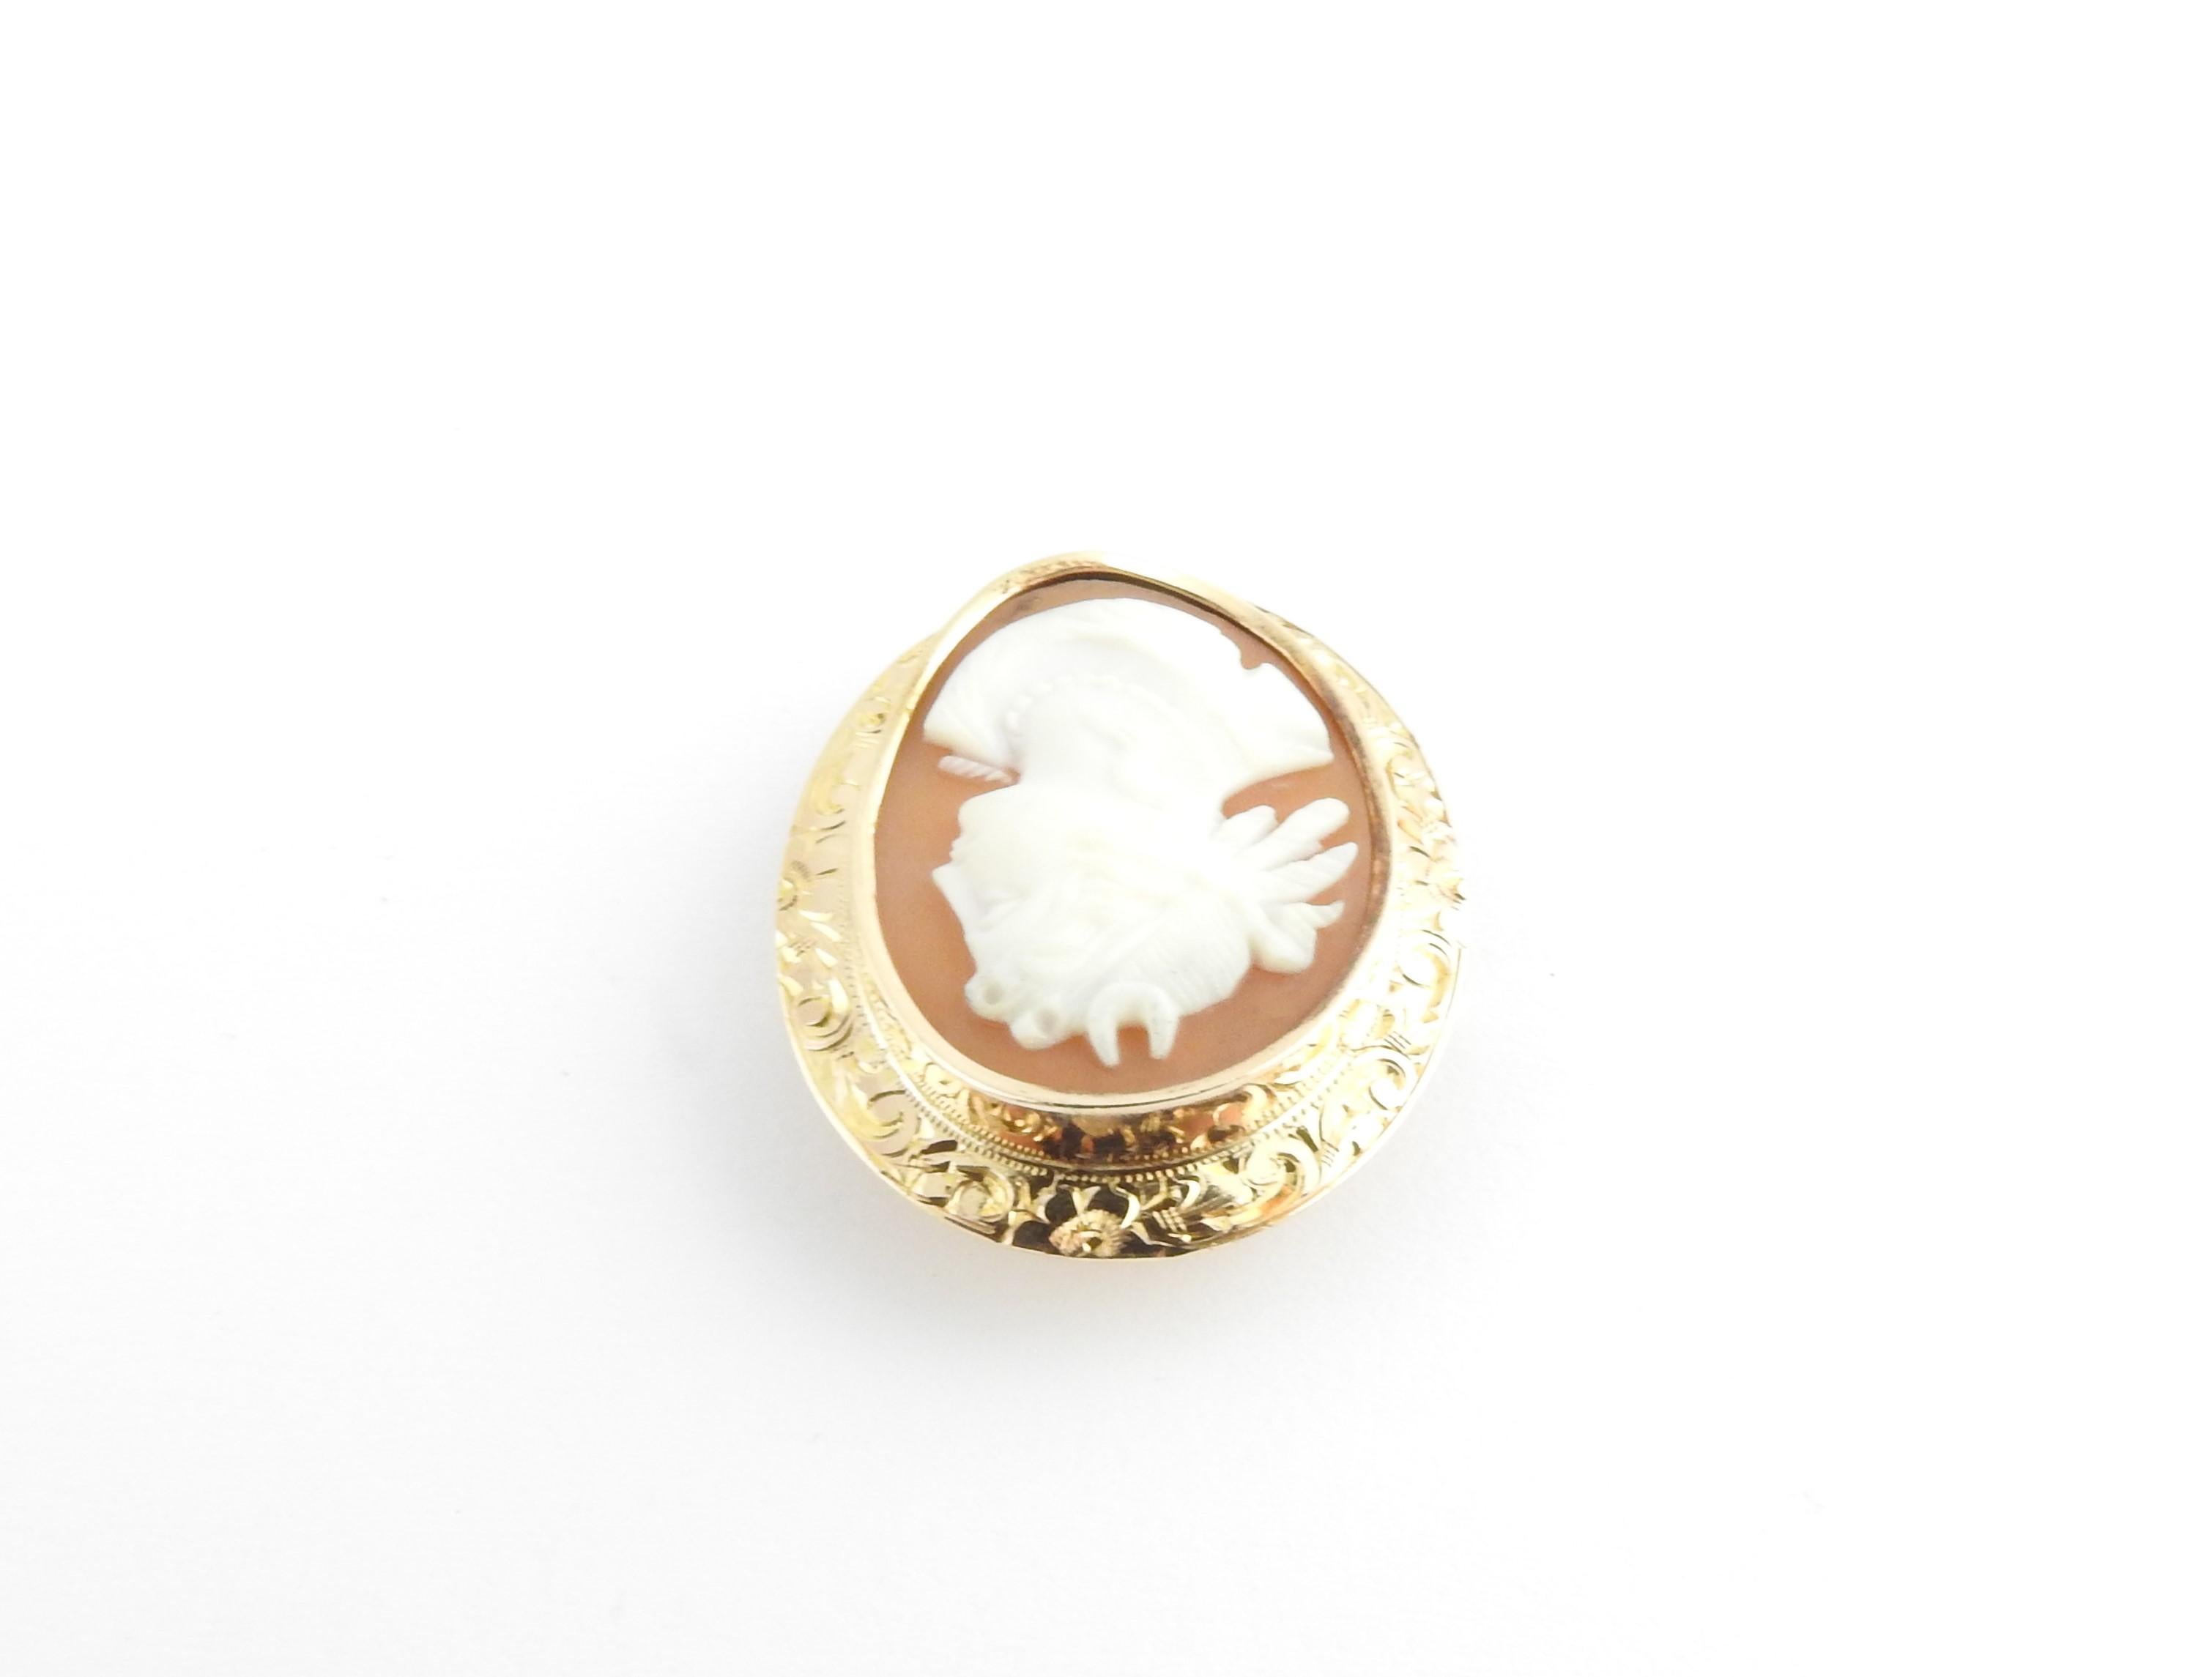 10 Karat Yellow Gold Cameo Brooch For Sale 1